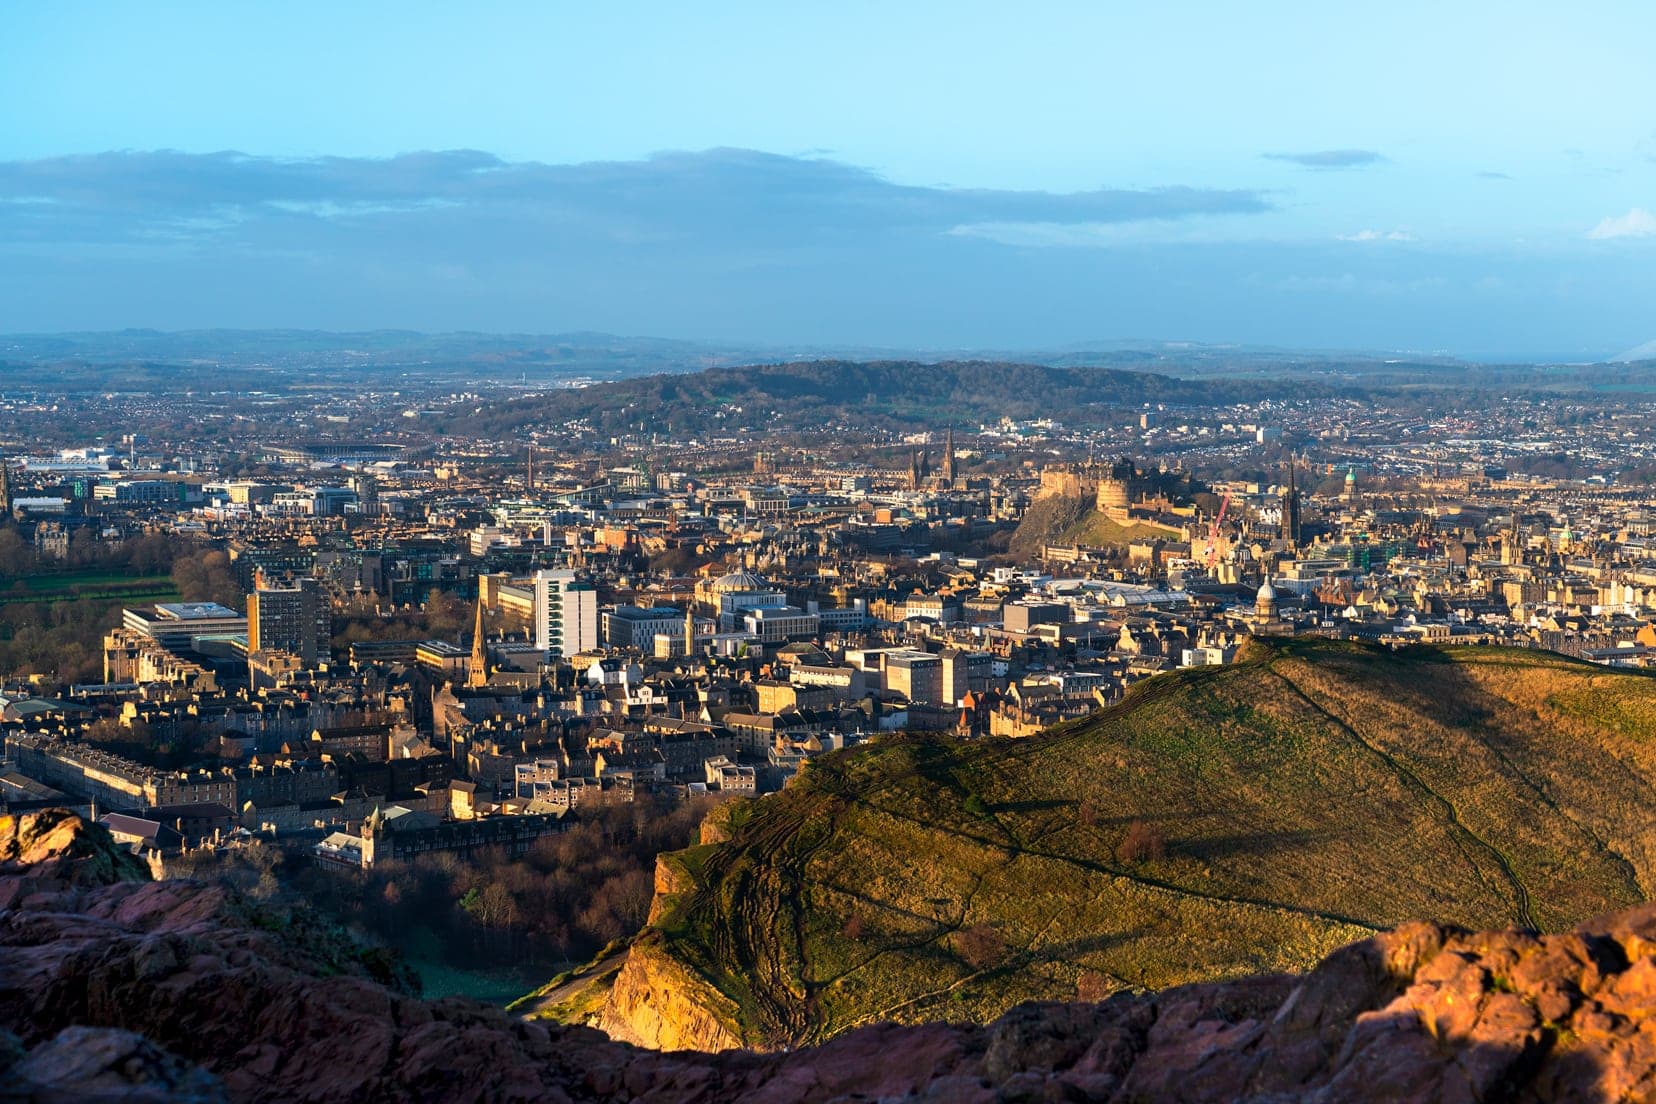 View-of-Edinburgh-from-Aurthur's Seat Summit, including Edinburgh Castle on the top of a hill